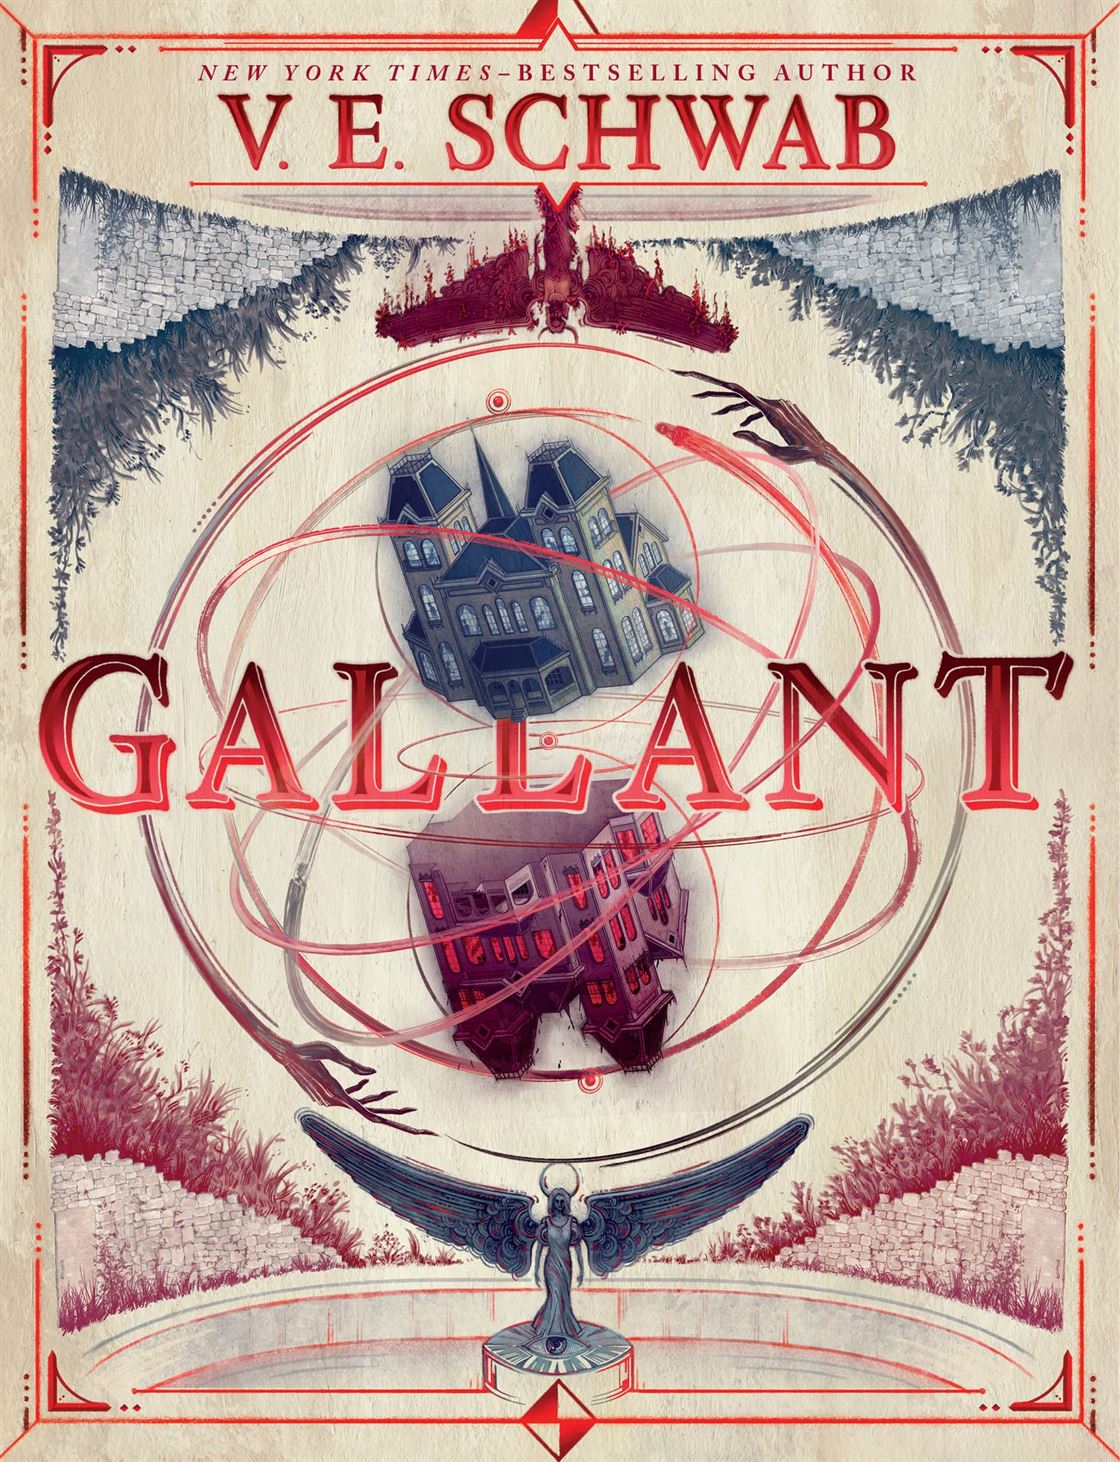 Cover for "Gallant" by V.E. Schwab Photo Courtesy of David Curtis